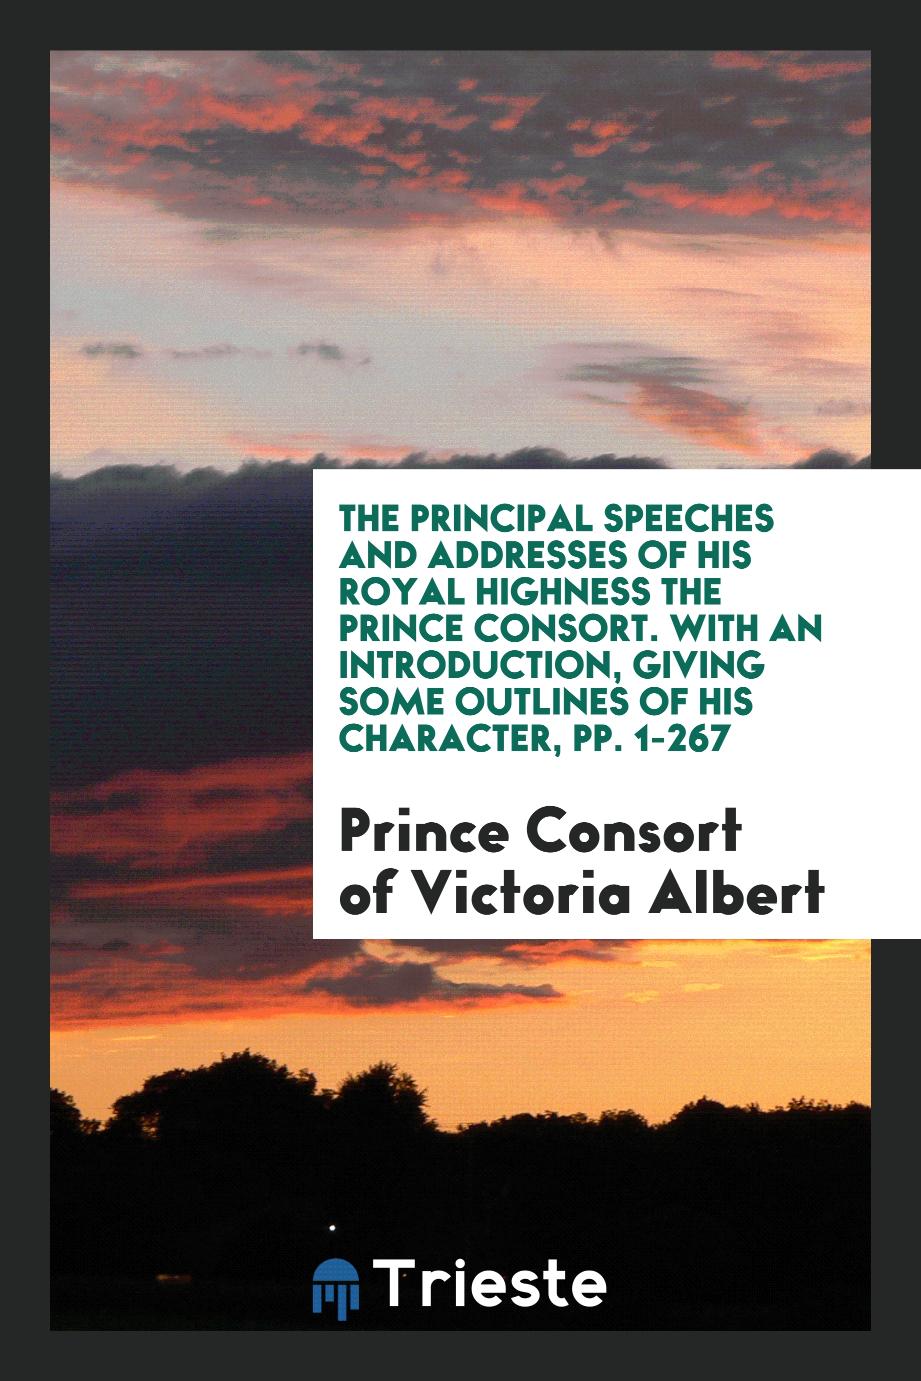 The Principal Speeches and Addresses of His Royal Highness the Prince Consort. With an Introduction, Giving Some Outlines of His Character, pp. 1-267